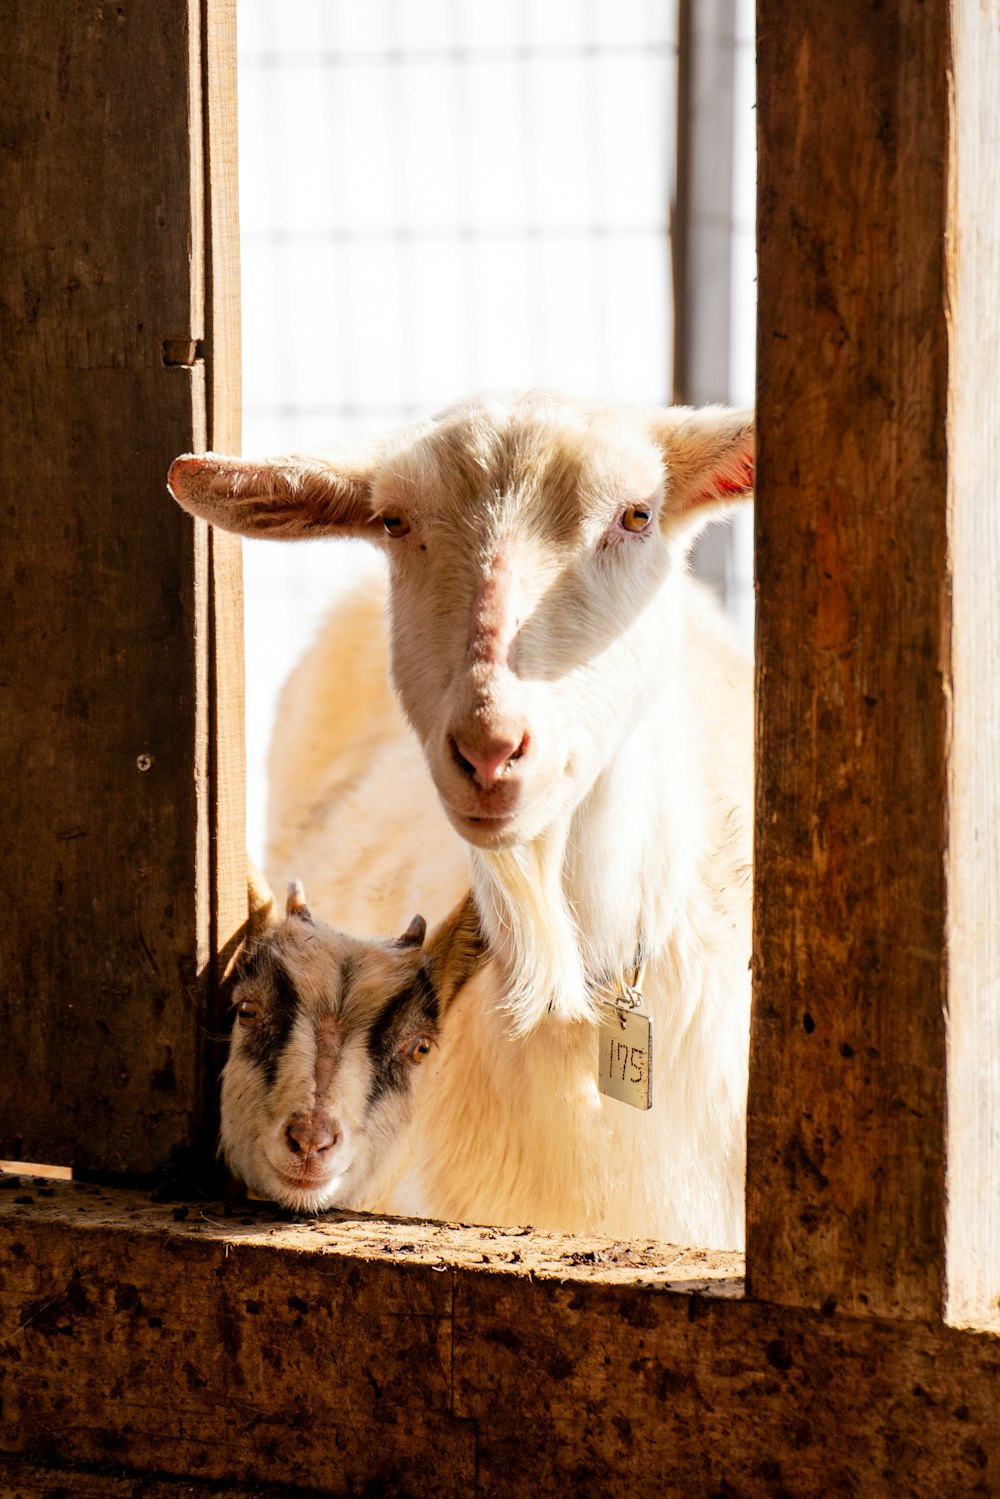 a goat and a goat laying down in a barn